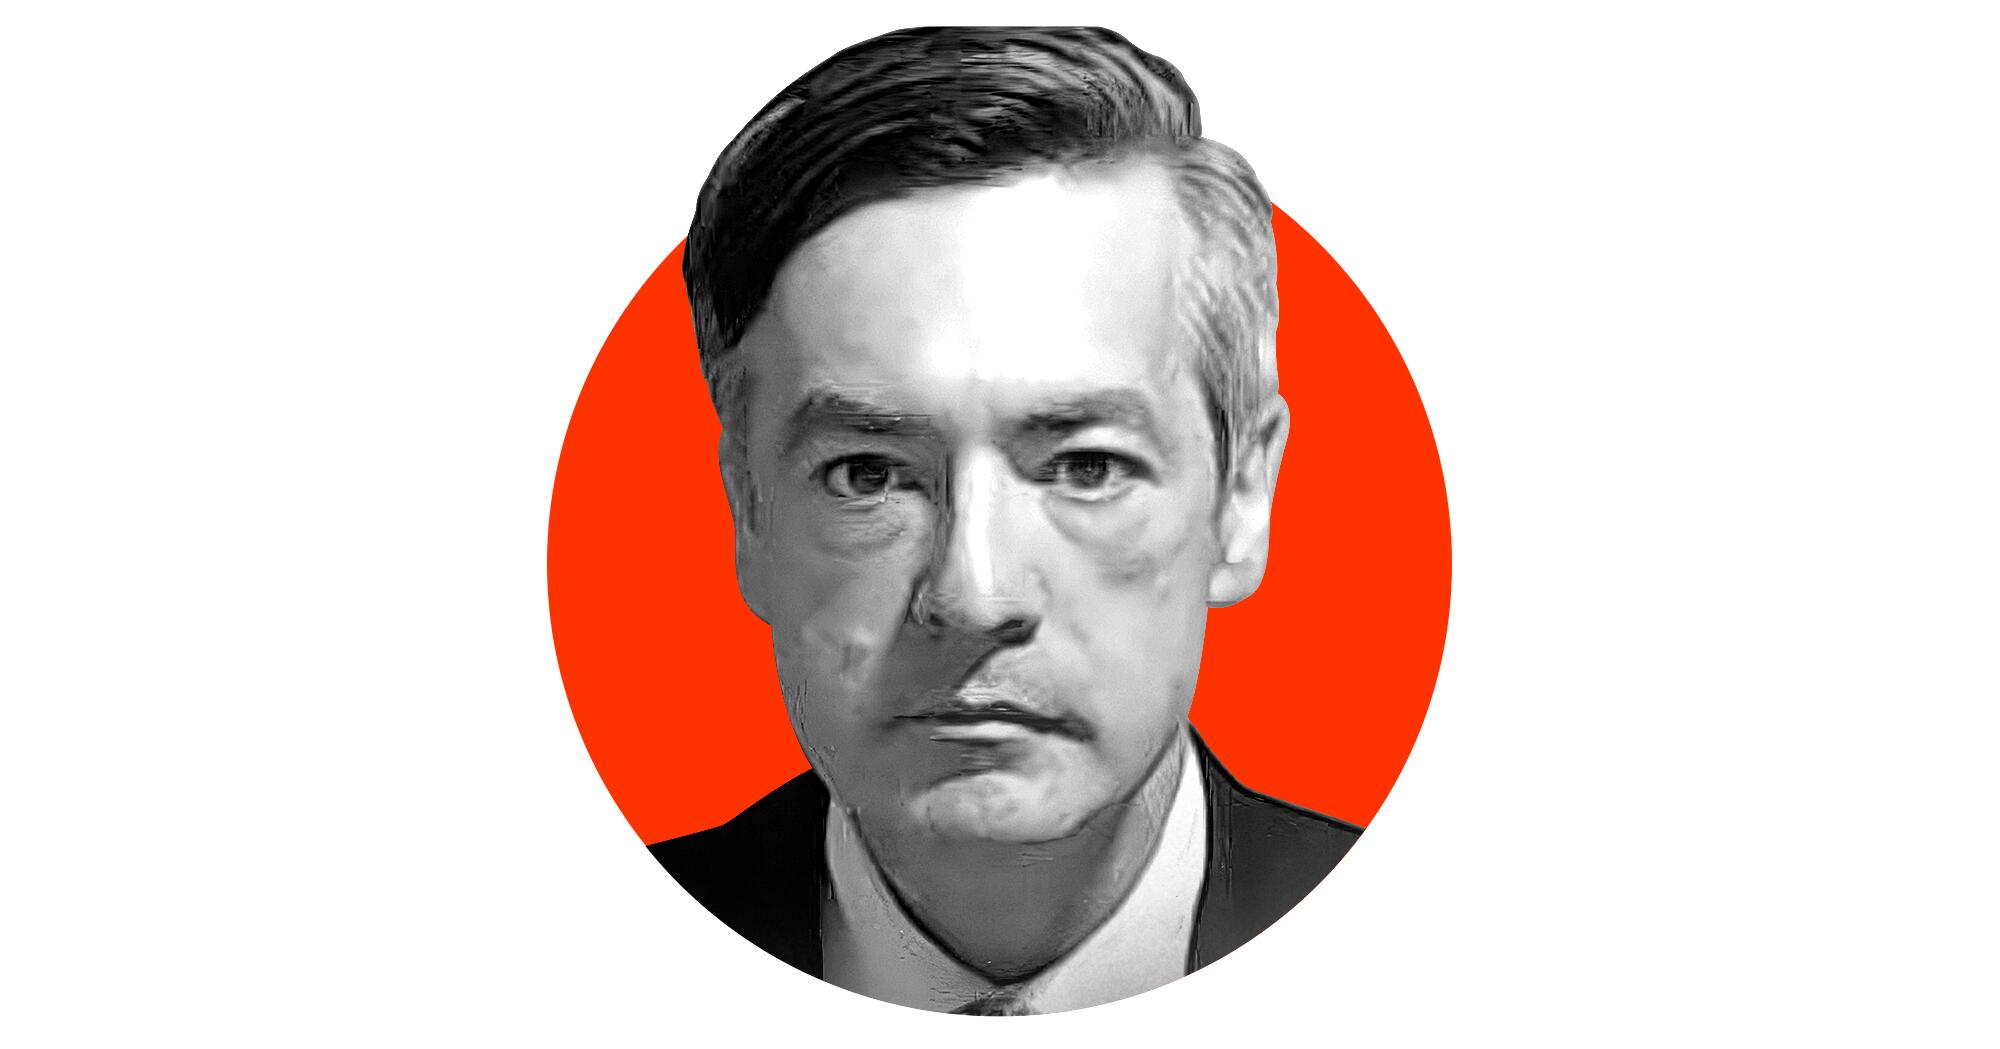 A photo illustration of a black-and-white police booking photo of lawyer Kenneth Chesebro emerging from a red circle